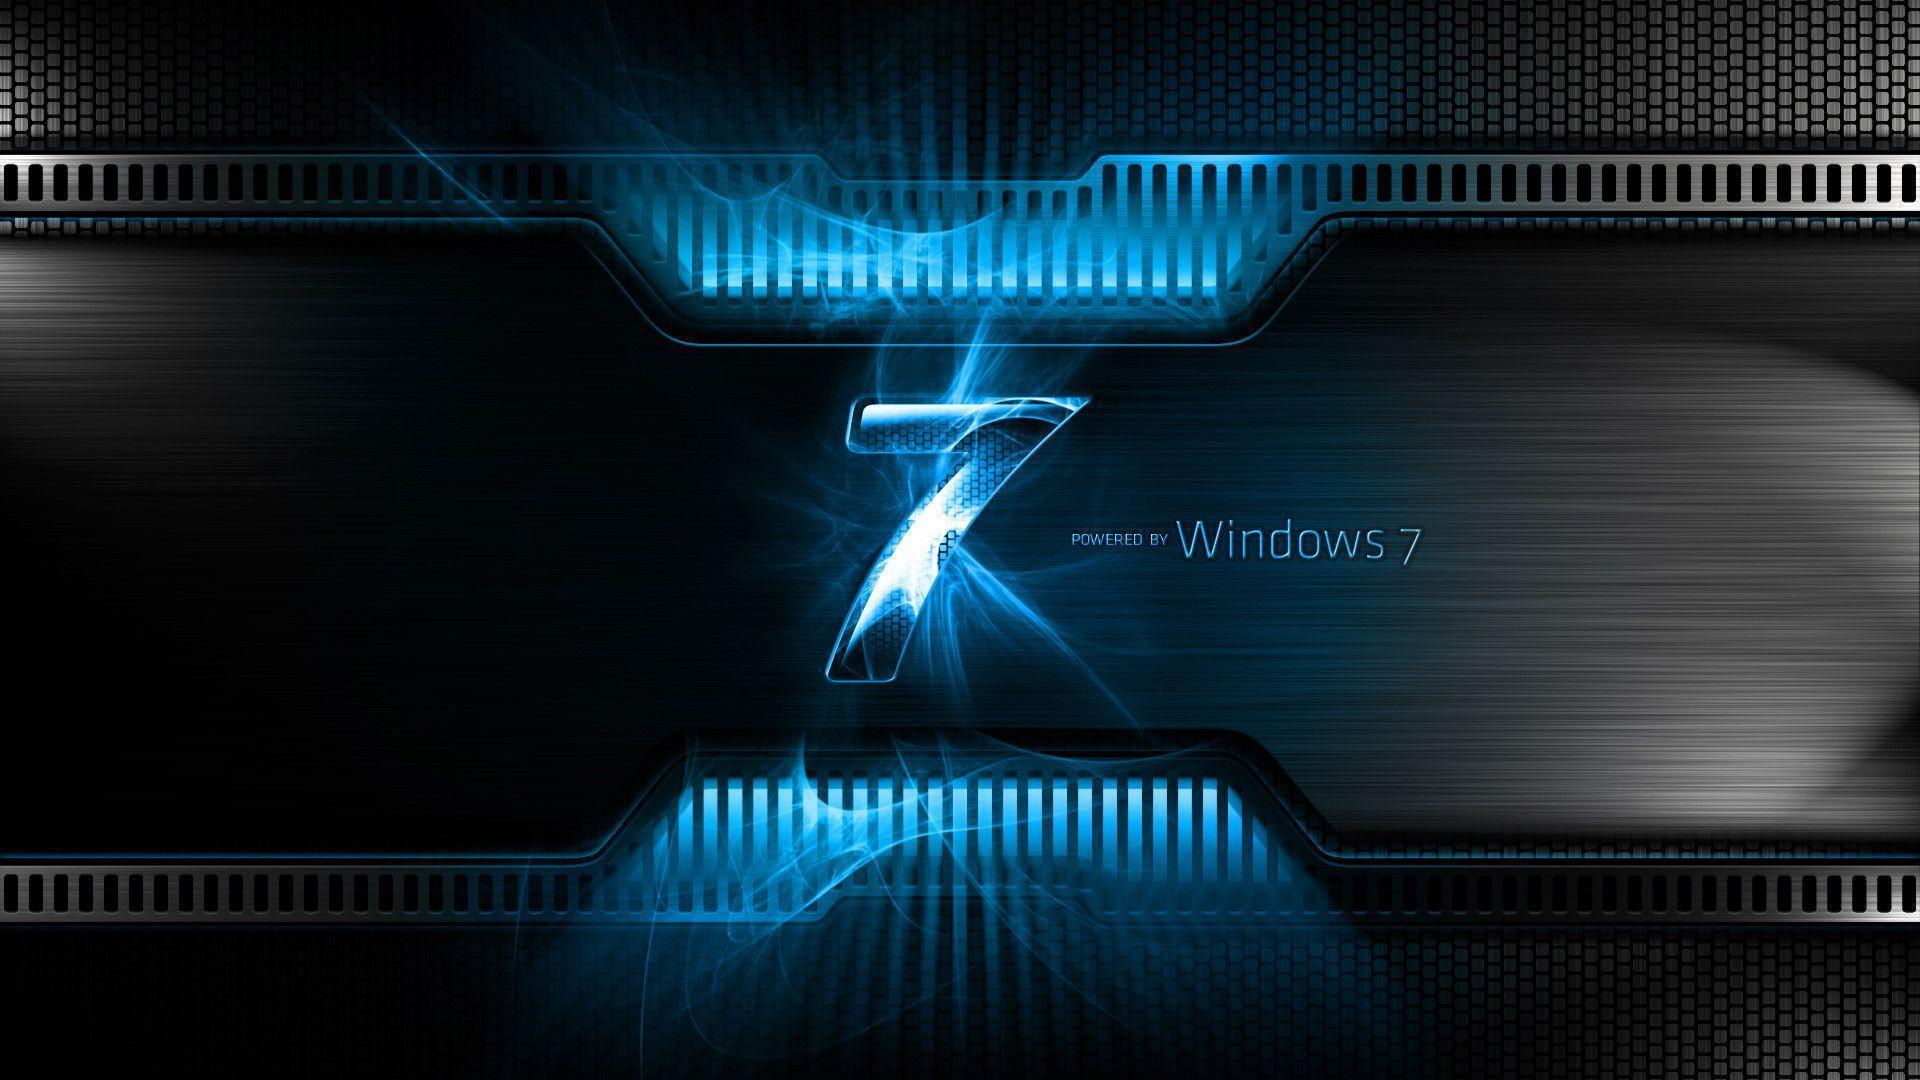 Download 26 Cool Windows 7 Wallpaper HD. The Android Review